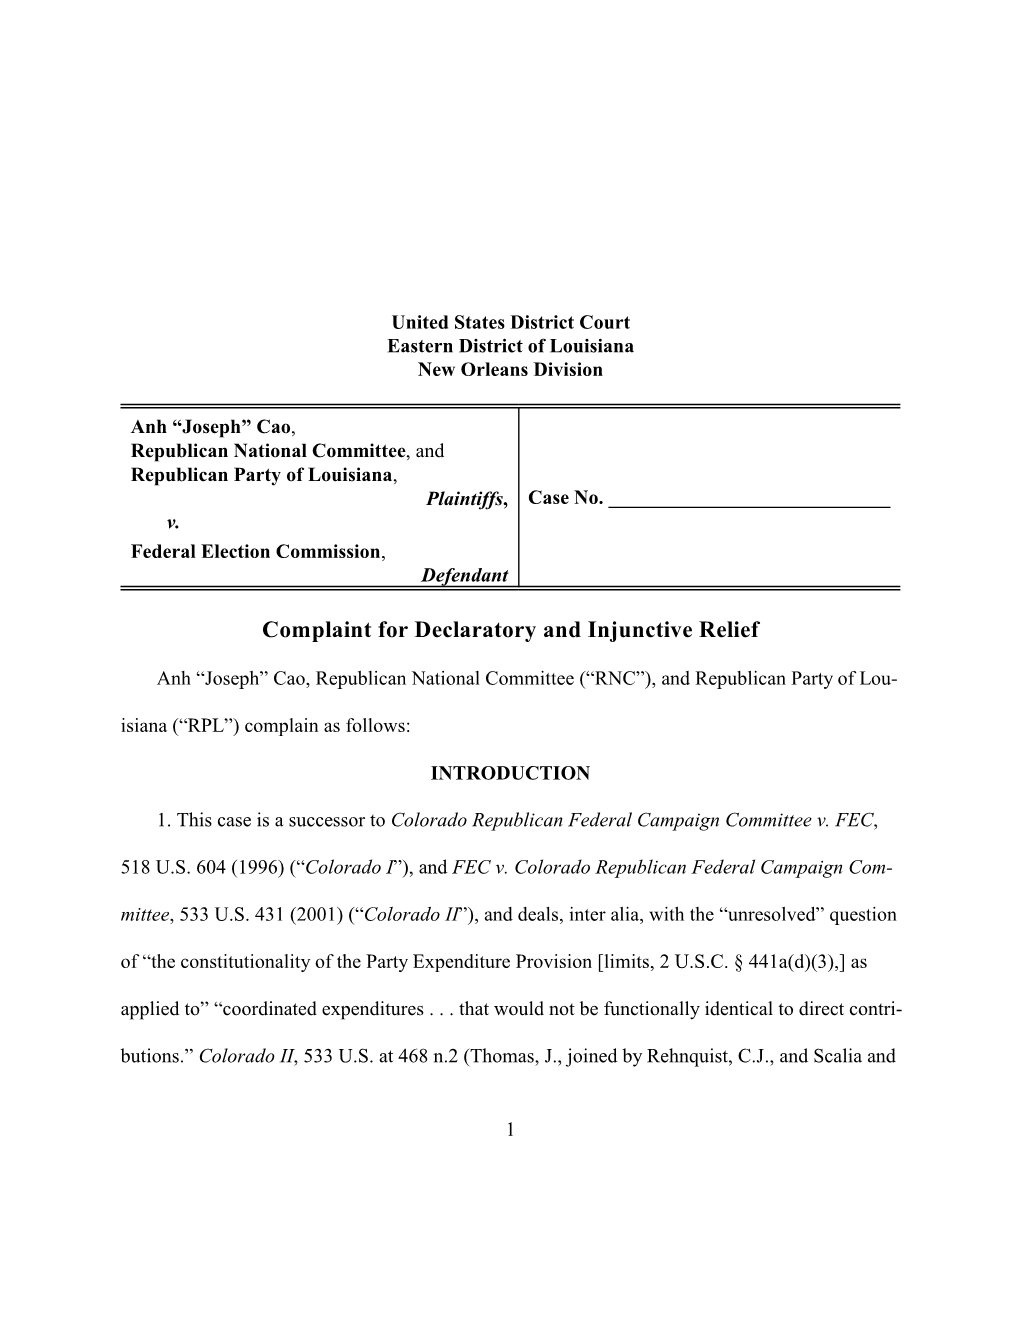 Complaint for Declaratory and Injunctive Relief